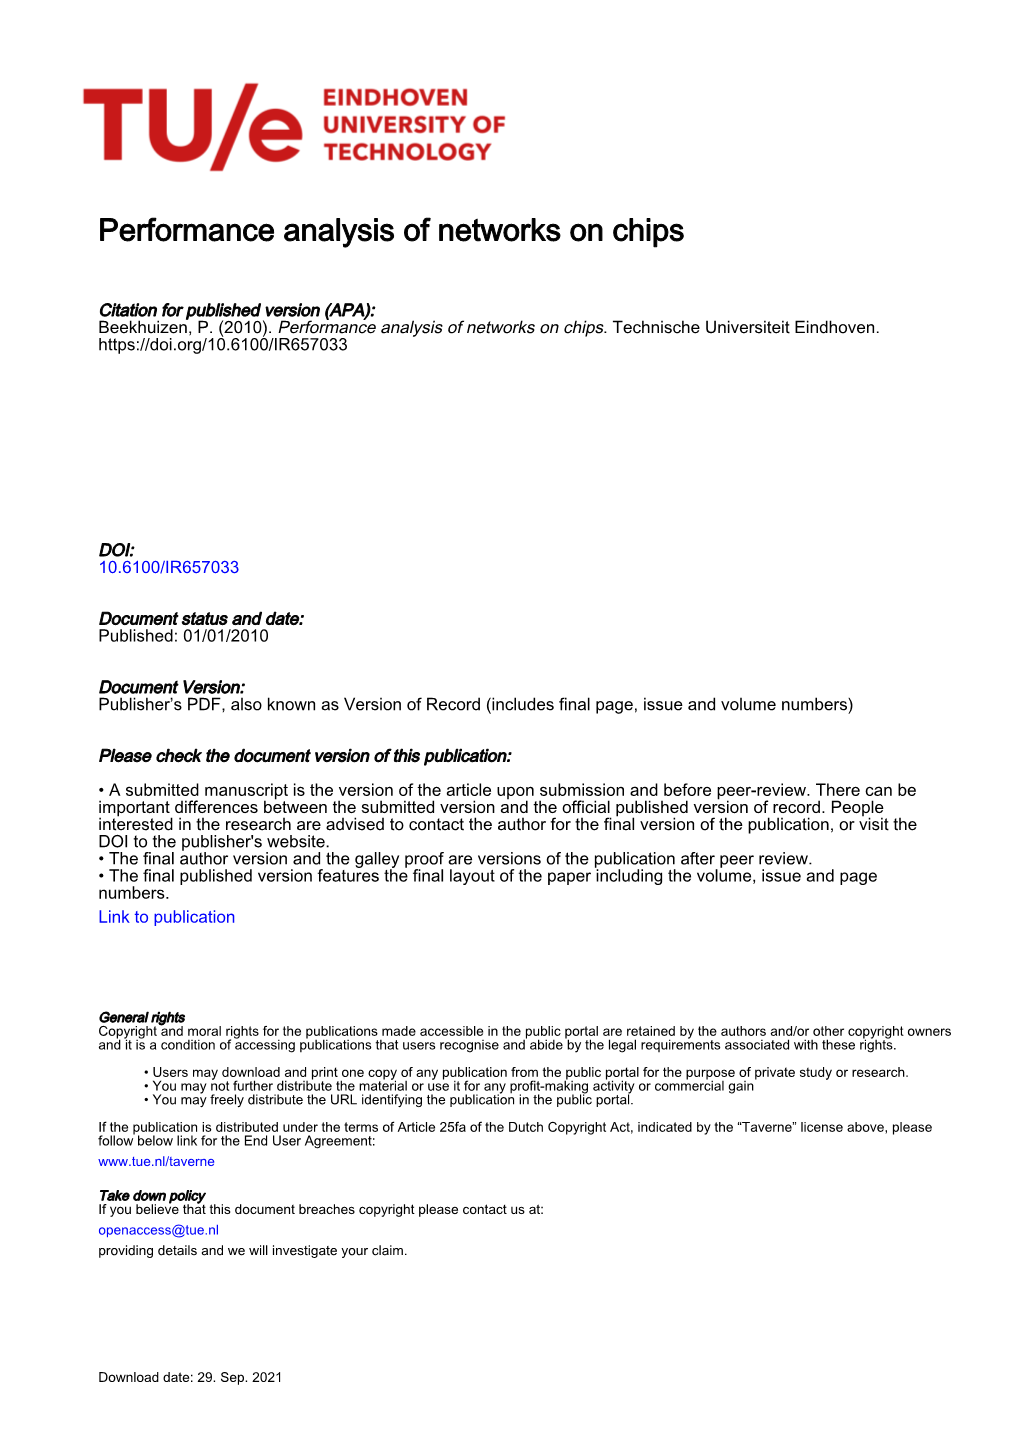 Performance Analysis of Networks on Chips